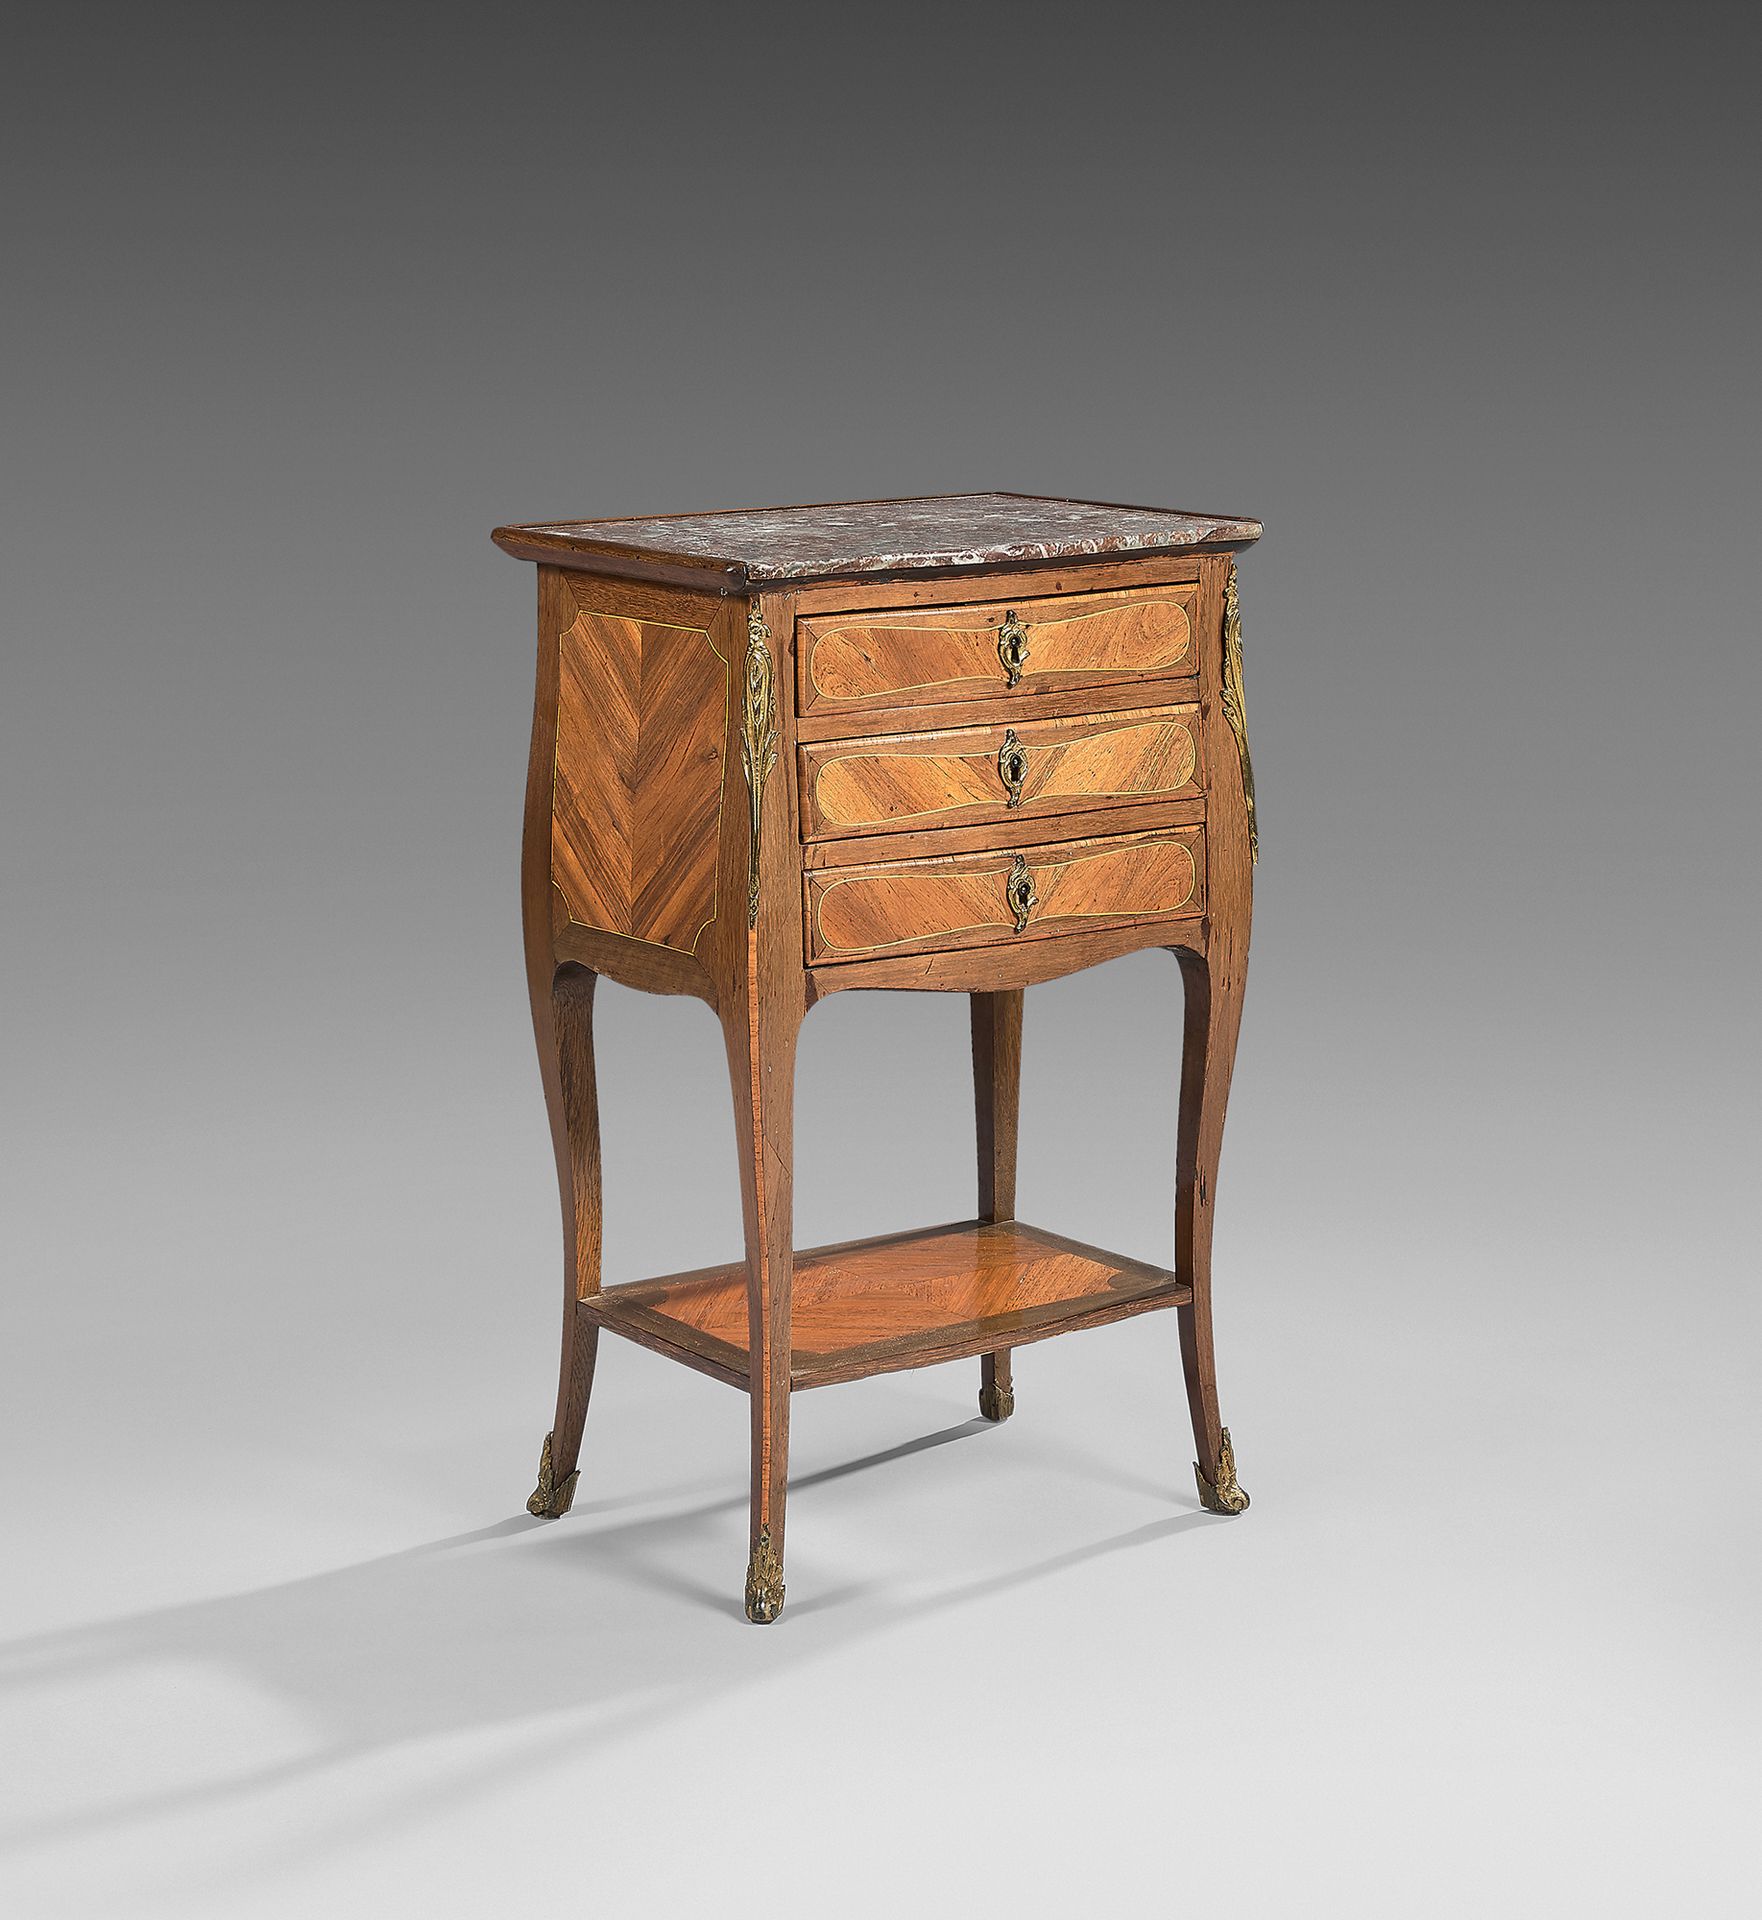 Null Table called "chiffonnière" inlaid with rosewood in frames of amaranth; it &hellip;